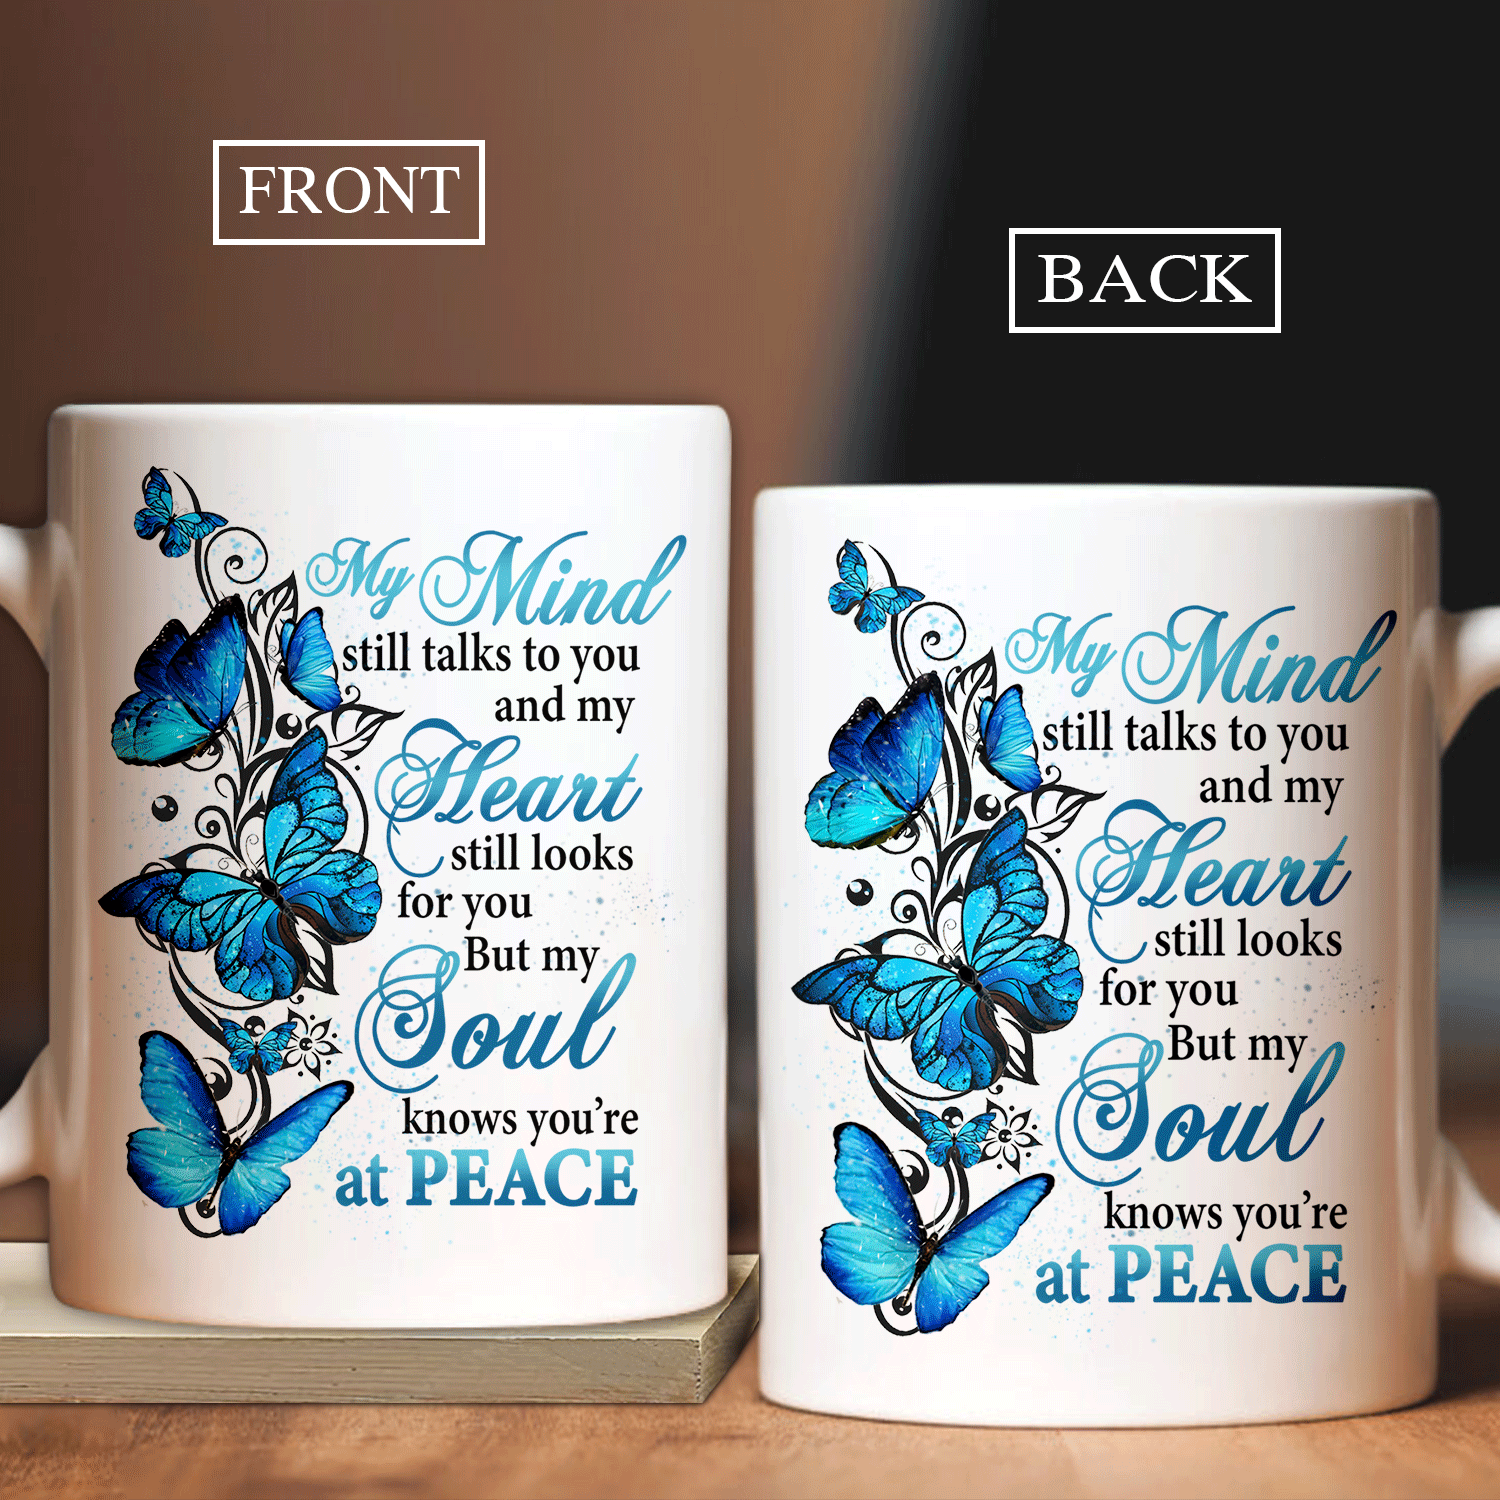 Memorial White Mug - Blue butterfly- Gift For Member Family - My mind still talks to you, My soul knows you're at peace - Heaven White Mug